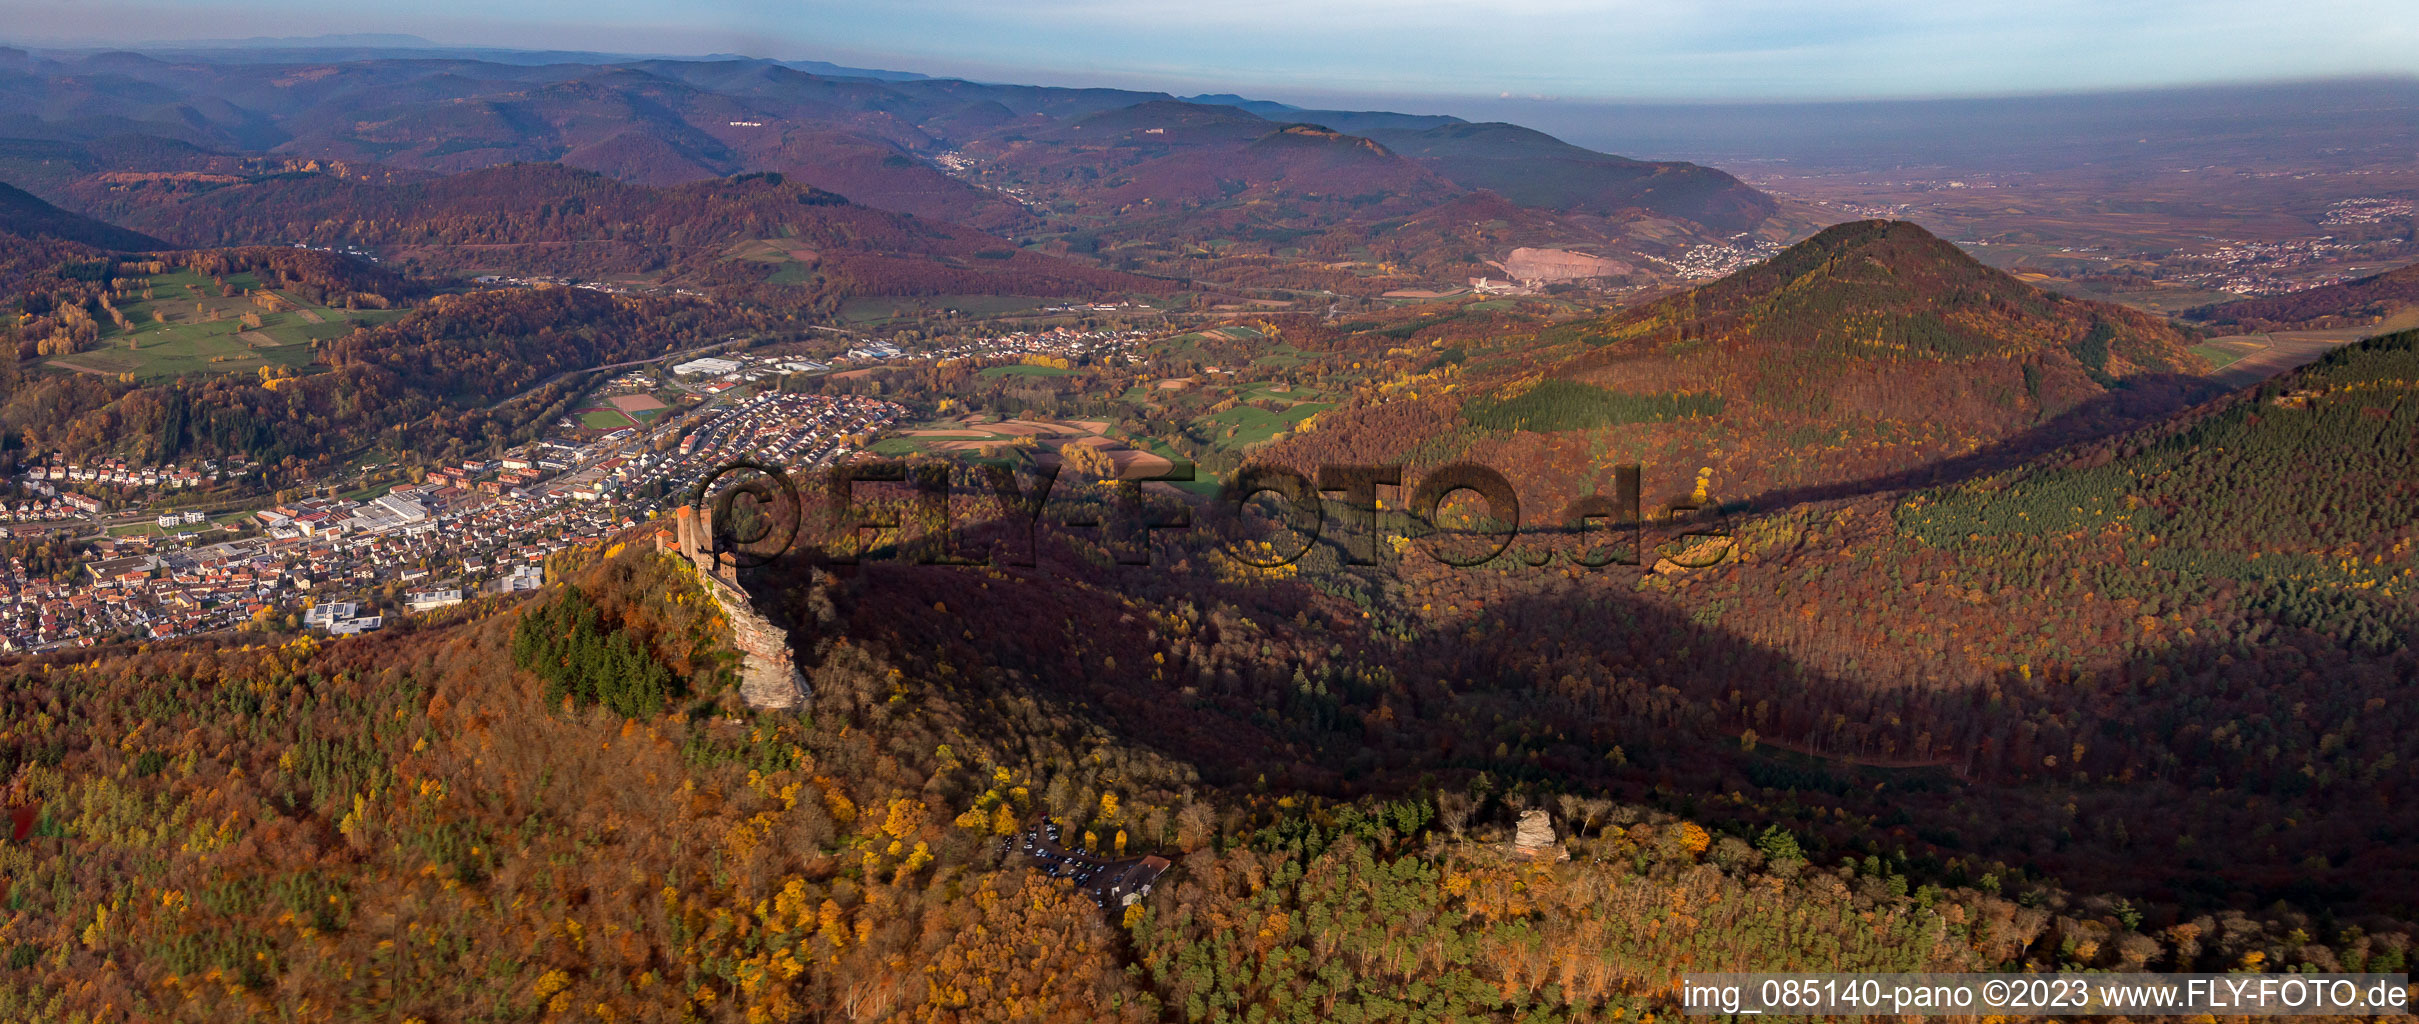 Trifels Castle in Annweiler am Trifels in the state Rhineland-Palatinate, Germany viewn from the air